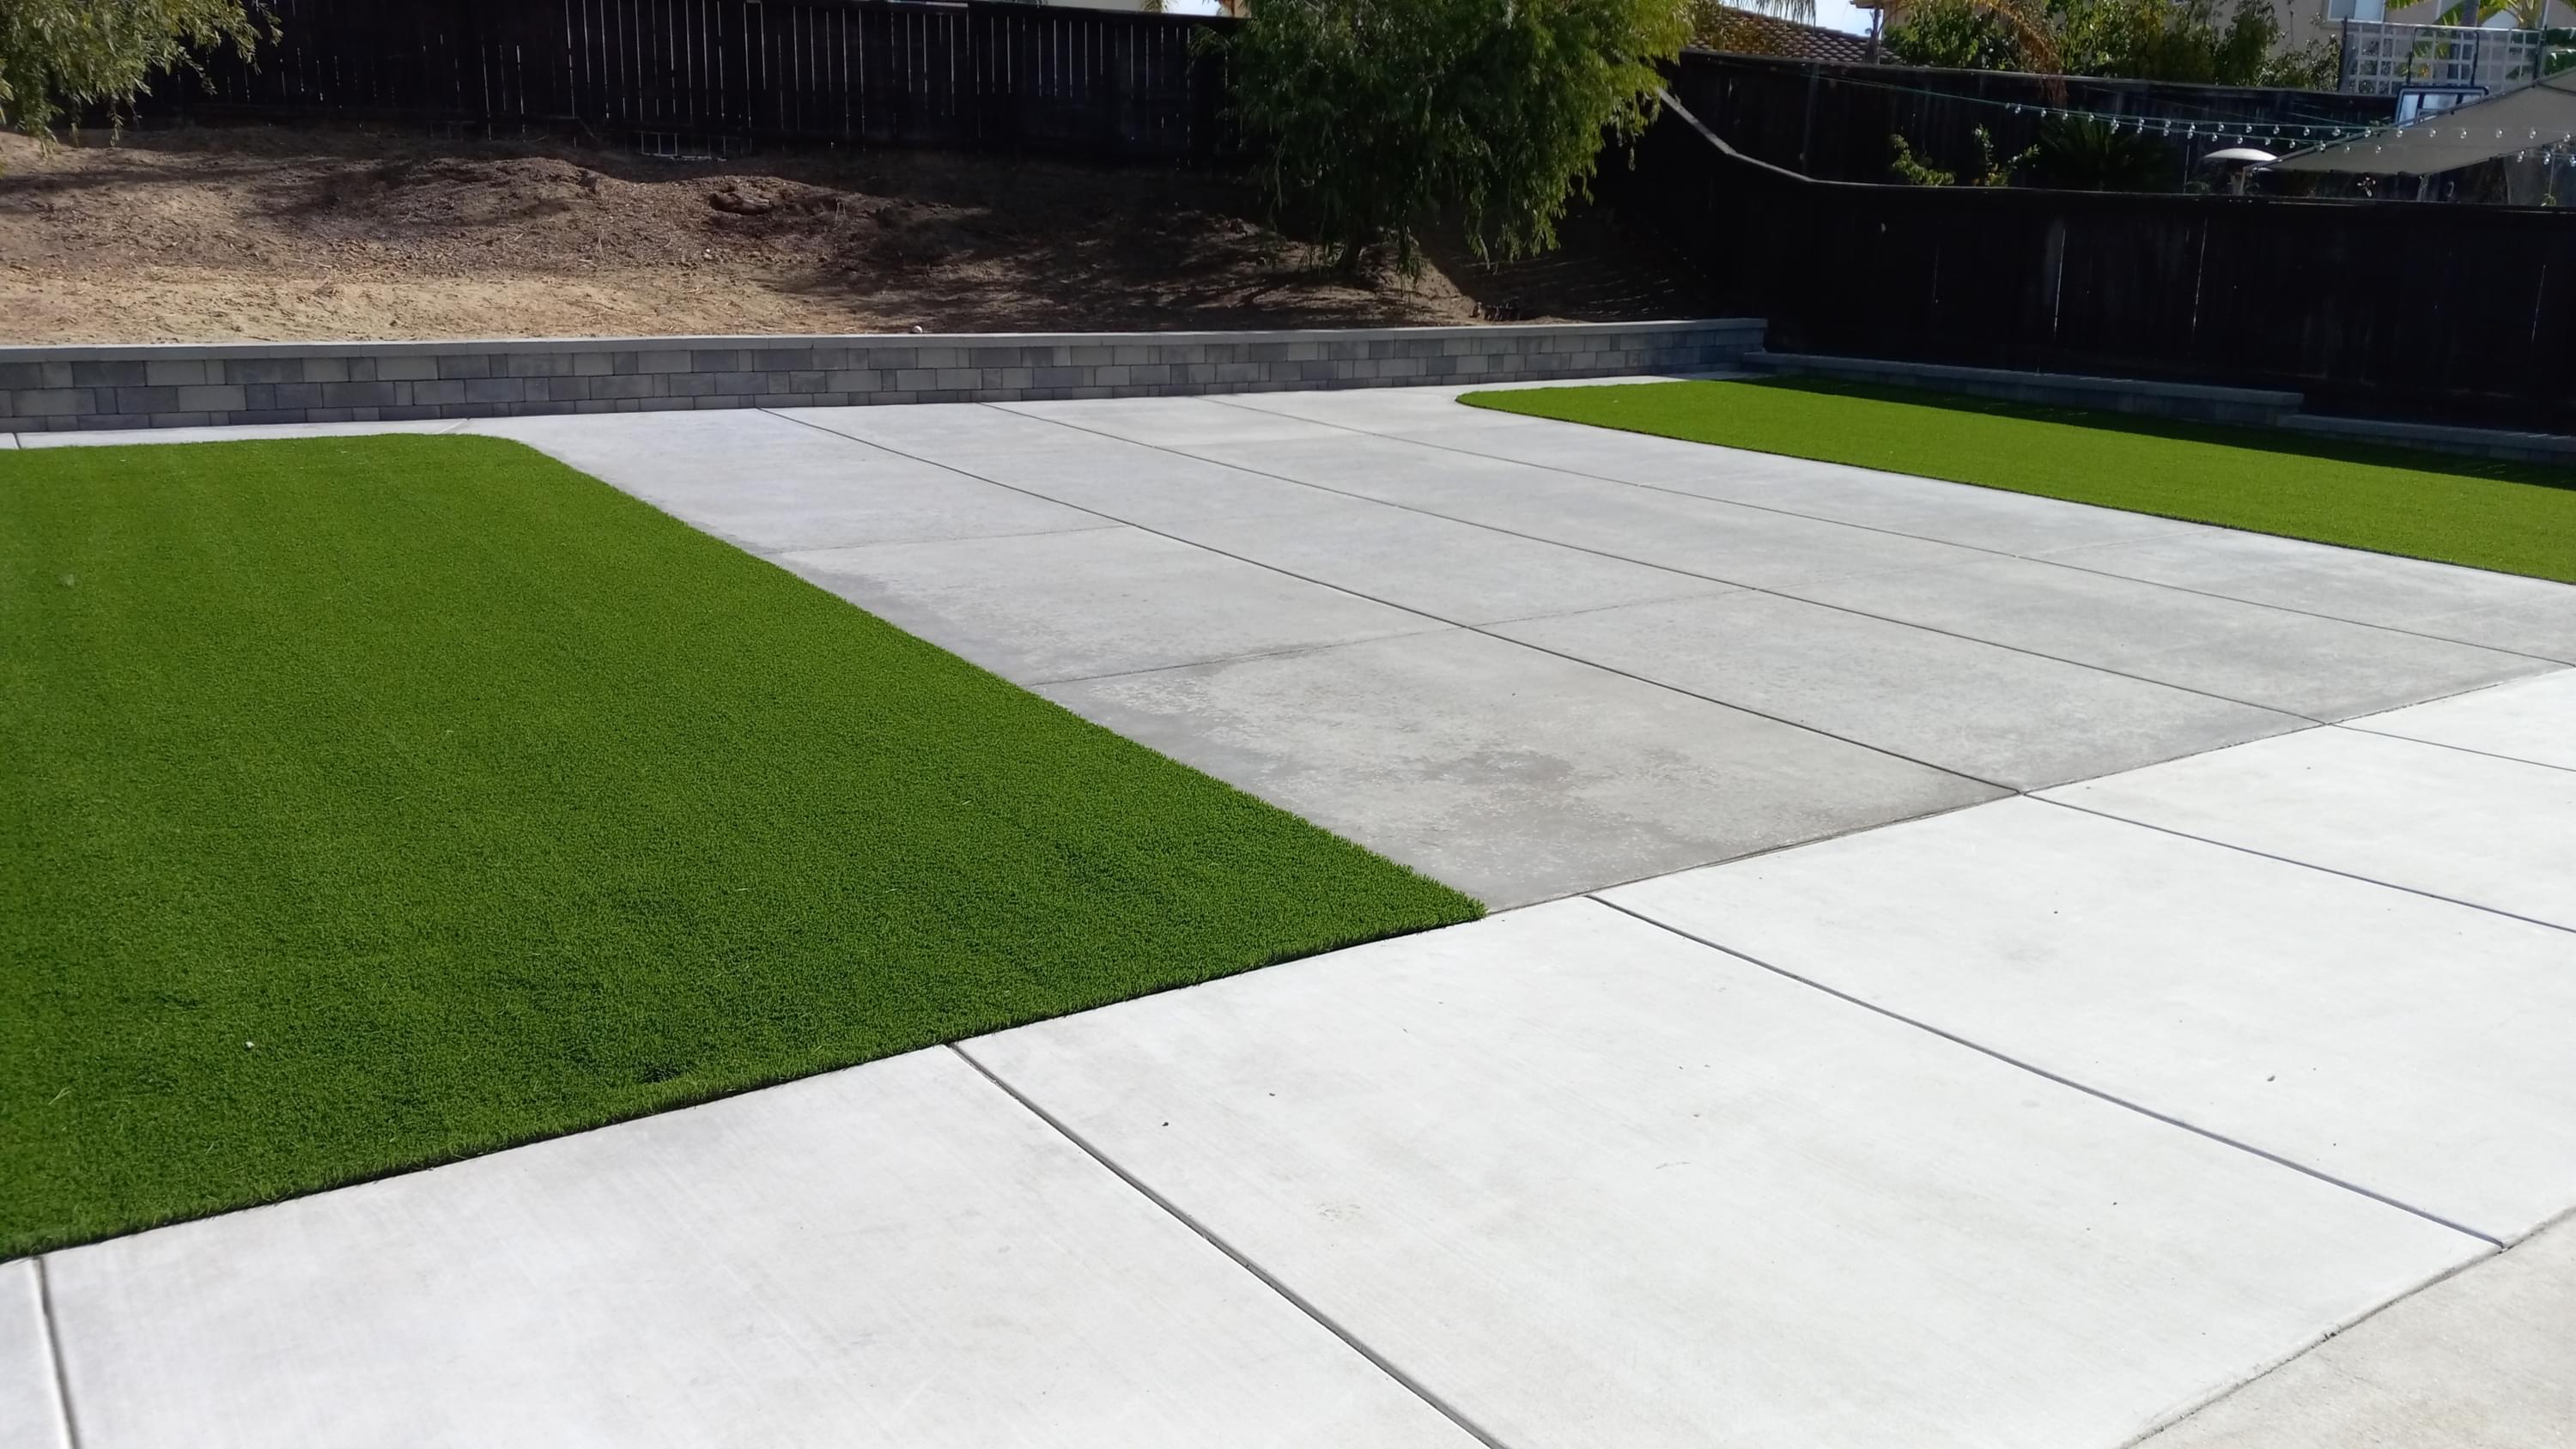 artificial turf installation cost in San Diego, artificial turf installation san Diego, turf installation san Diego, Turf Specialist San Diego, Artificial Turf Installer San Diego